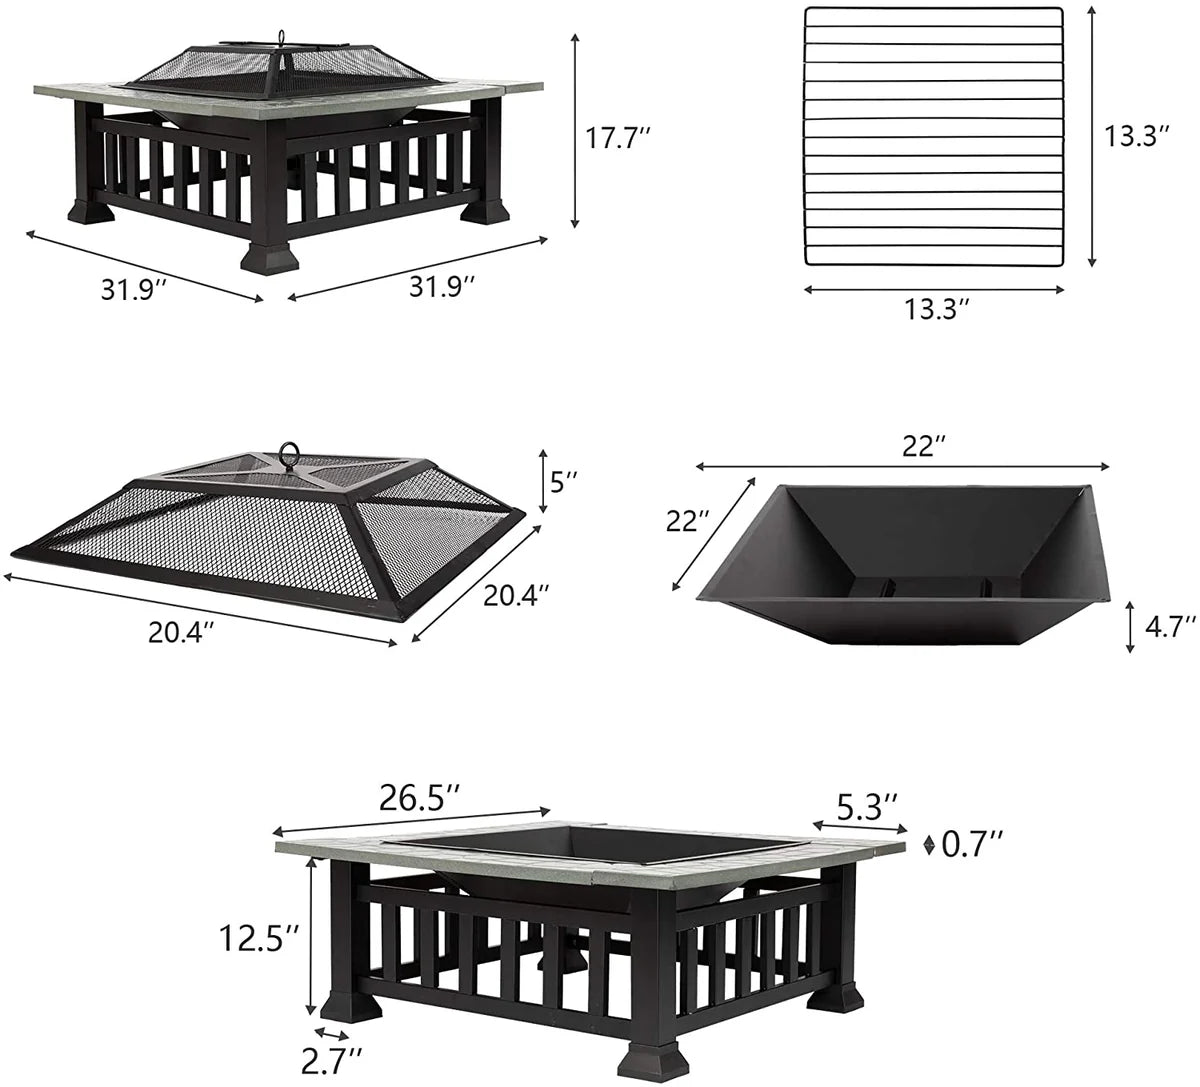 32" Outdoor Square Fire Pits Patio 4 in 1 Fire Pits for Heating Grilling Cooling Drinks & Food